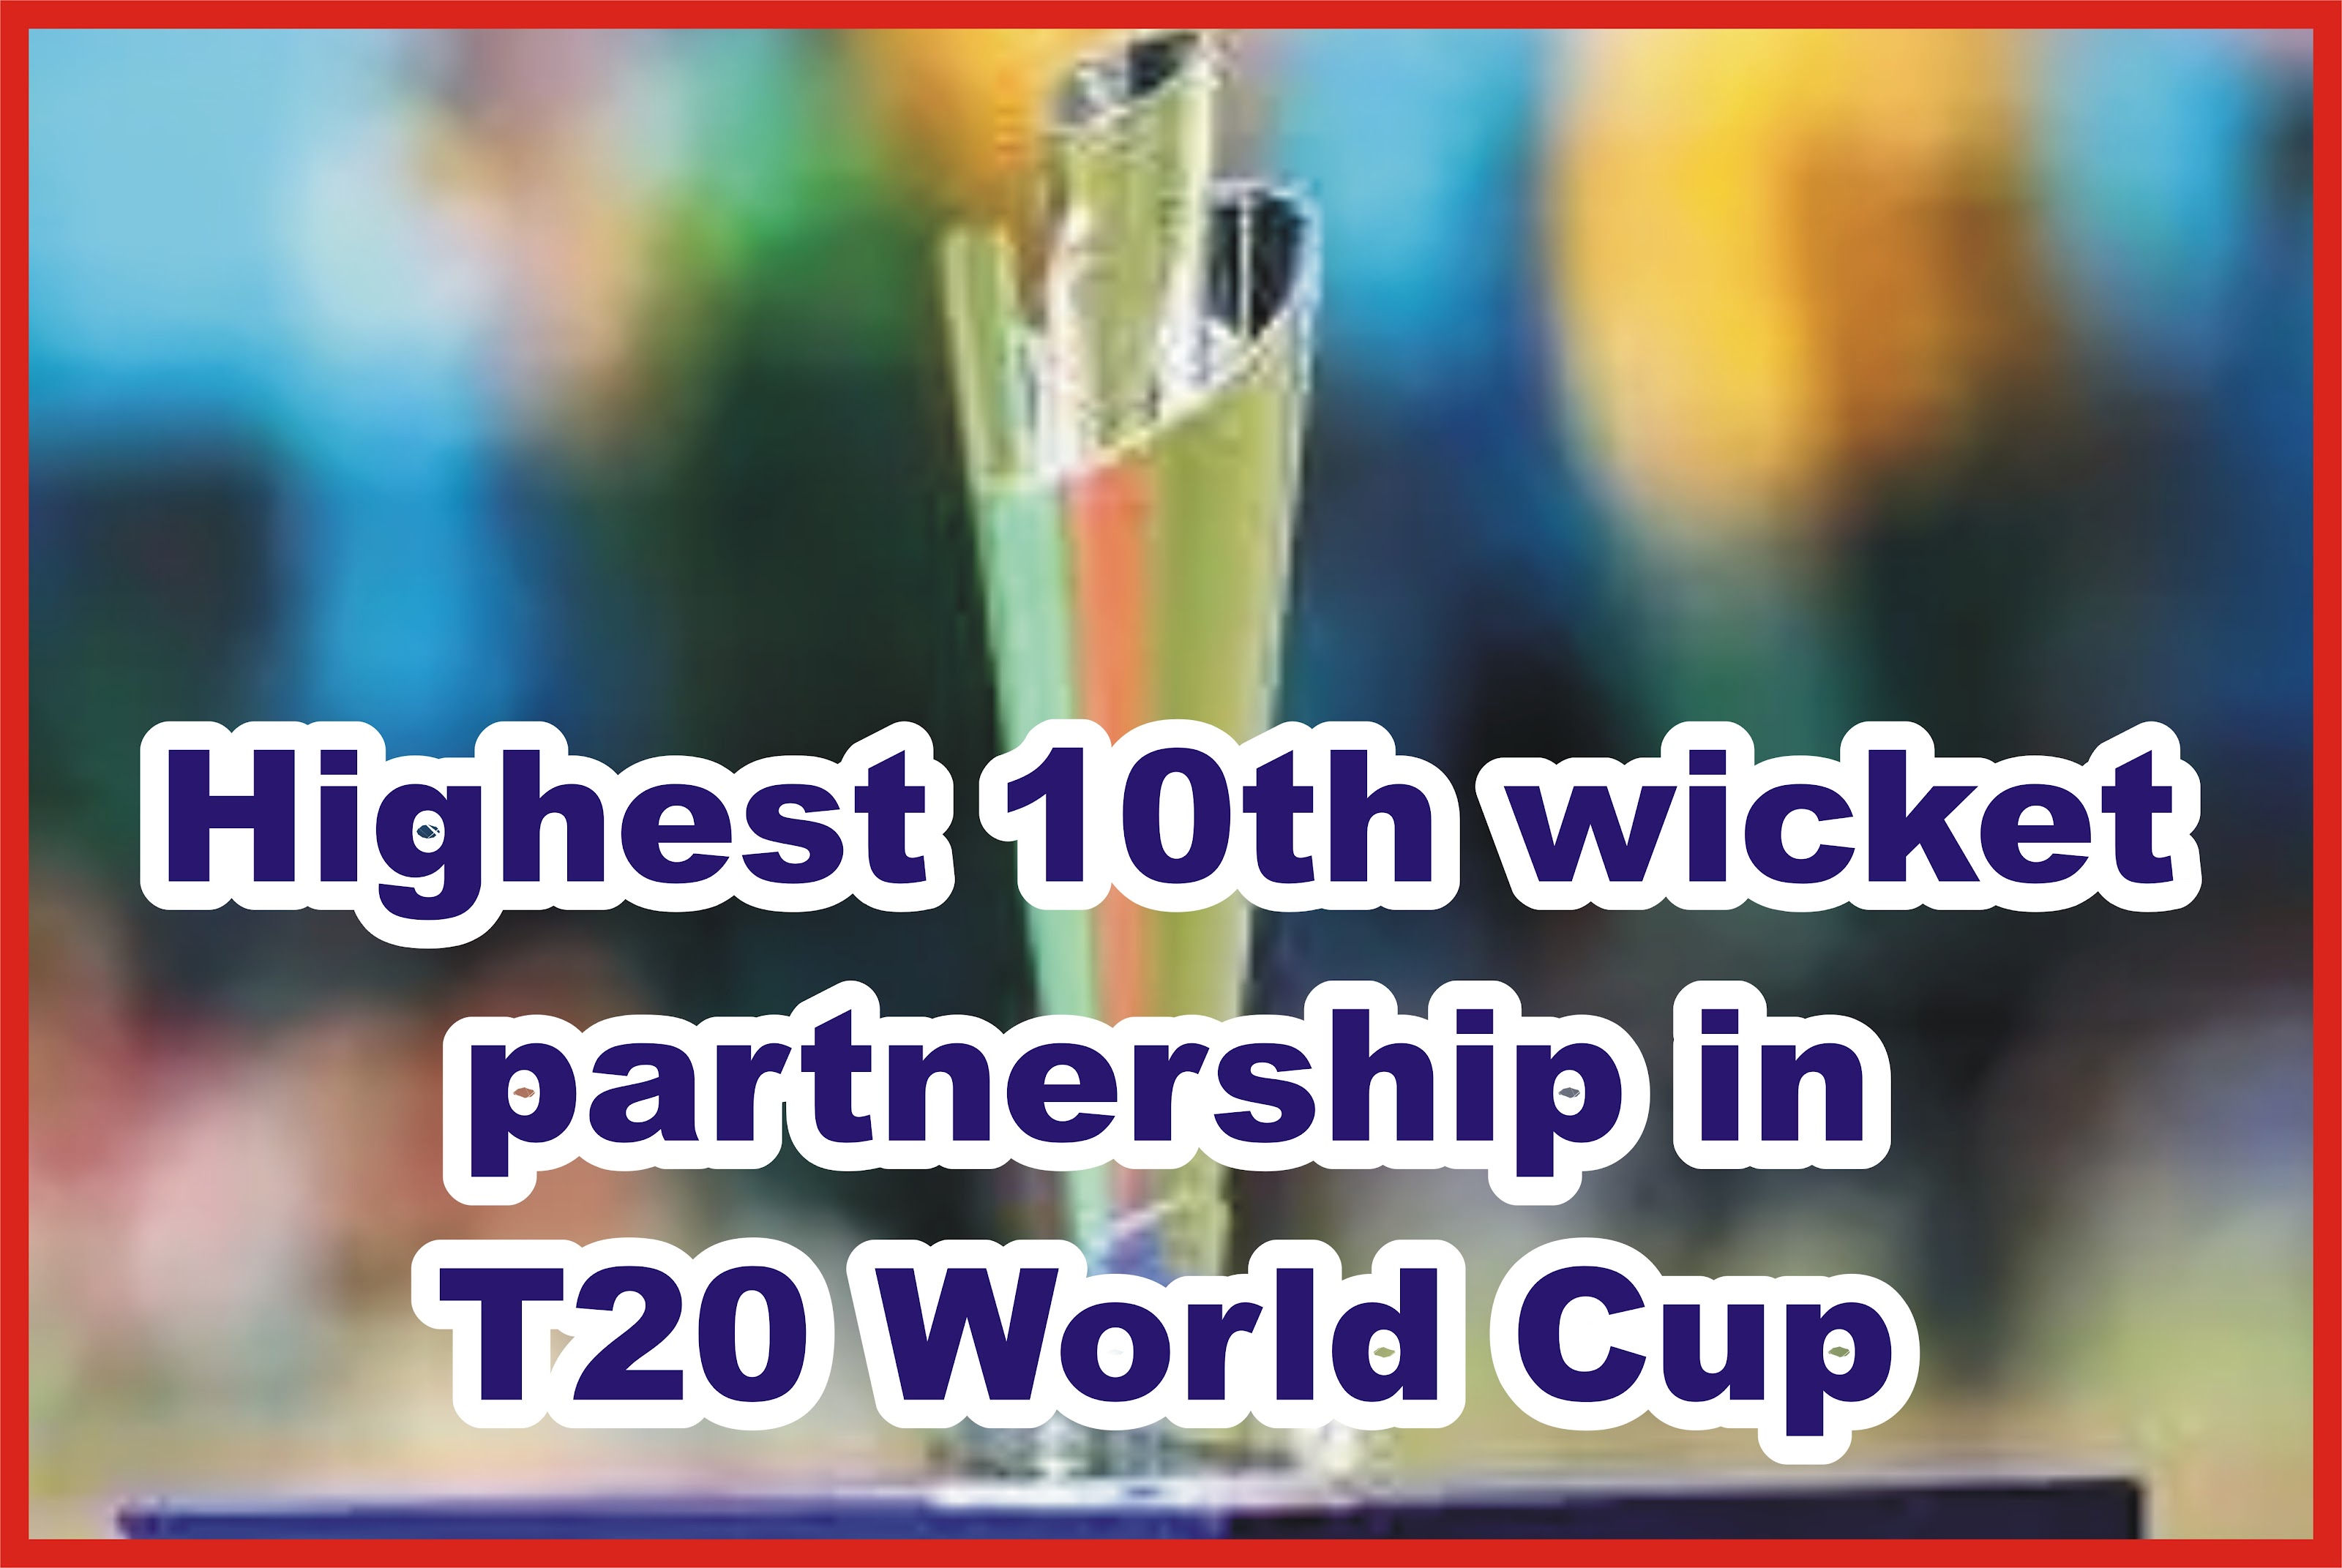 Highest 10th wicket partnership in T20 World Cup